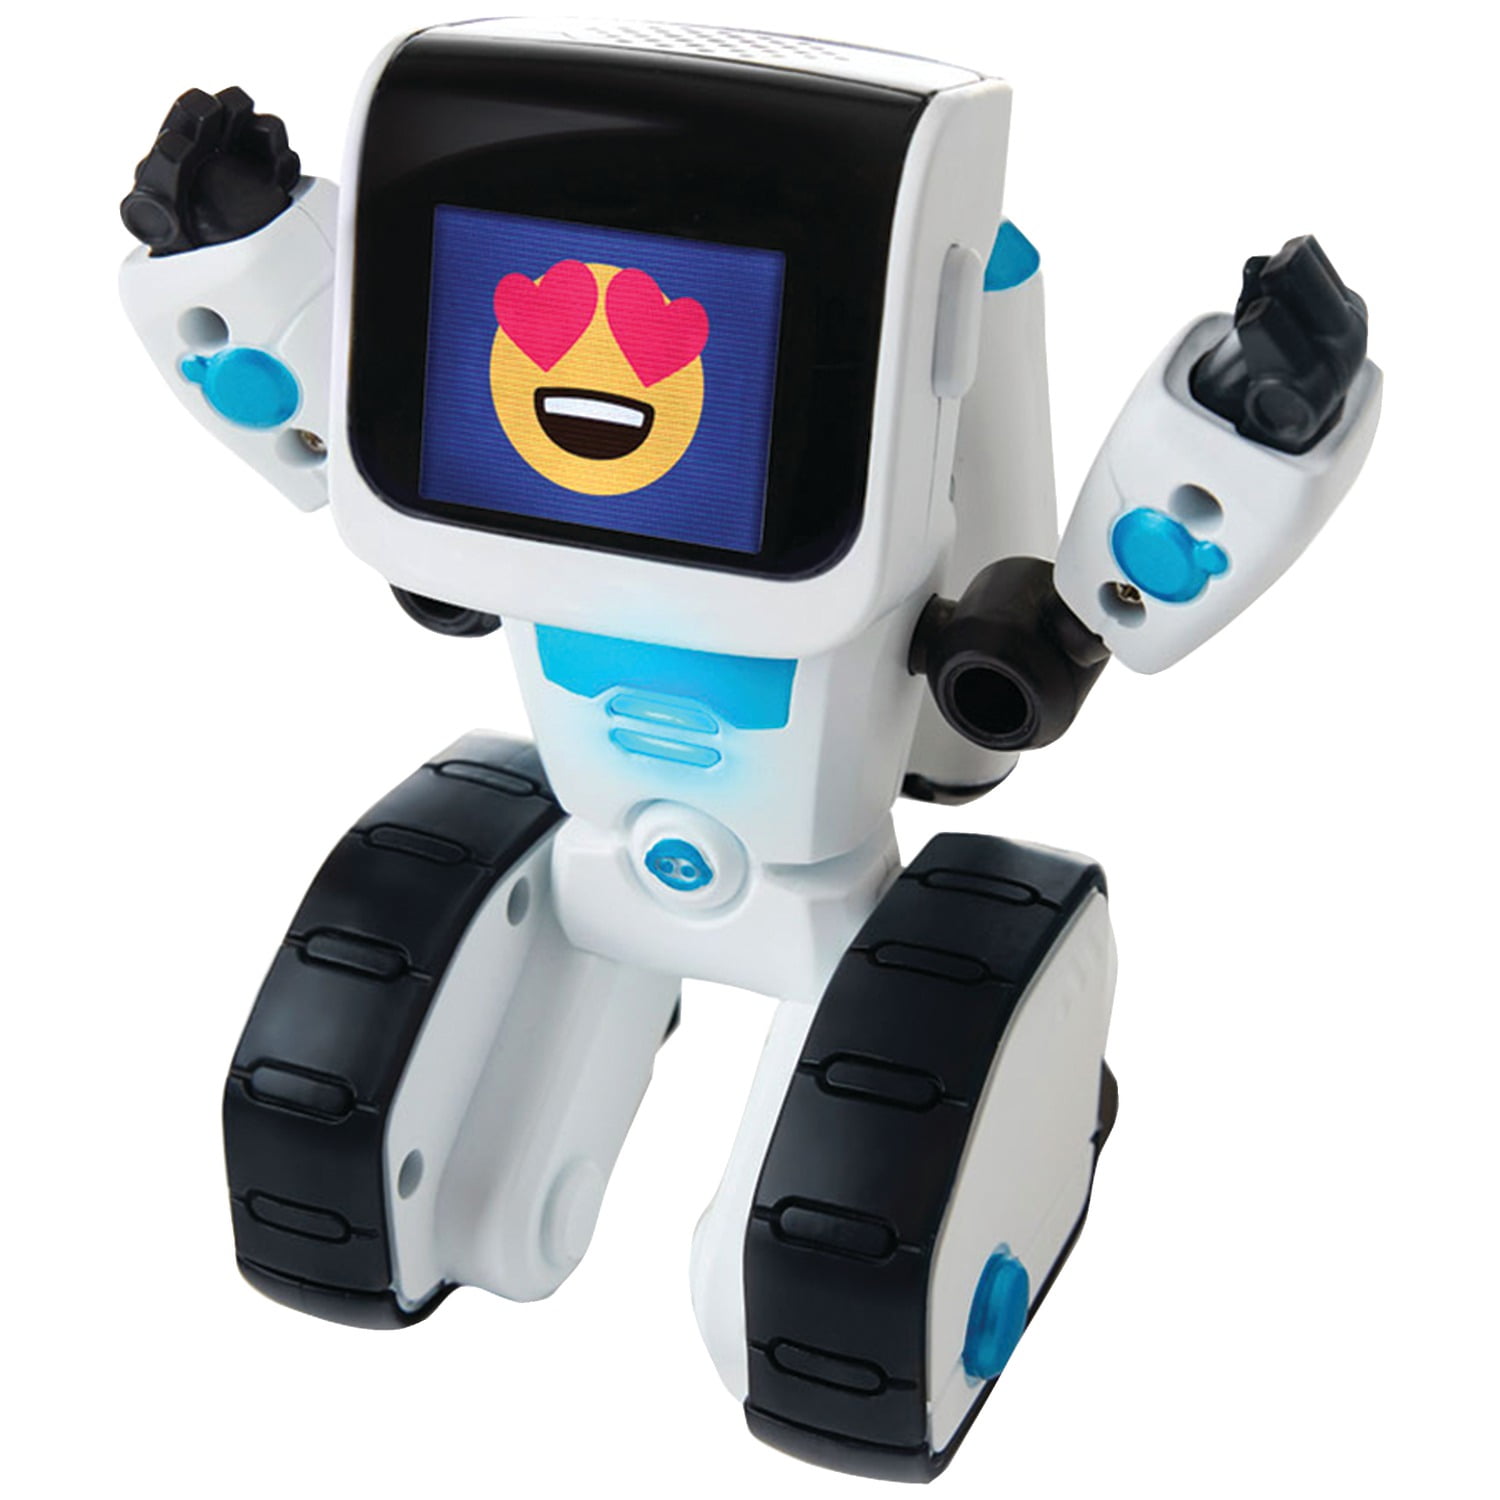 Details about   WowWee COJI The Coding Robot Toy 